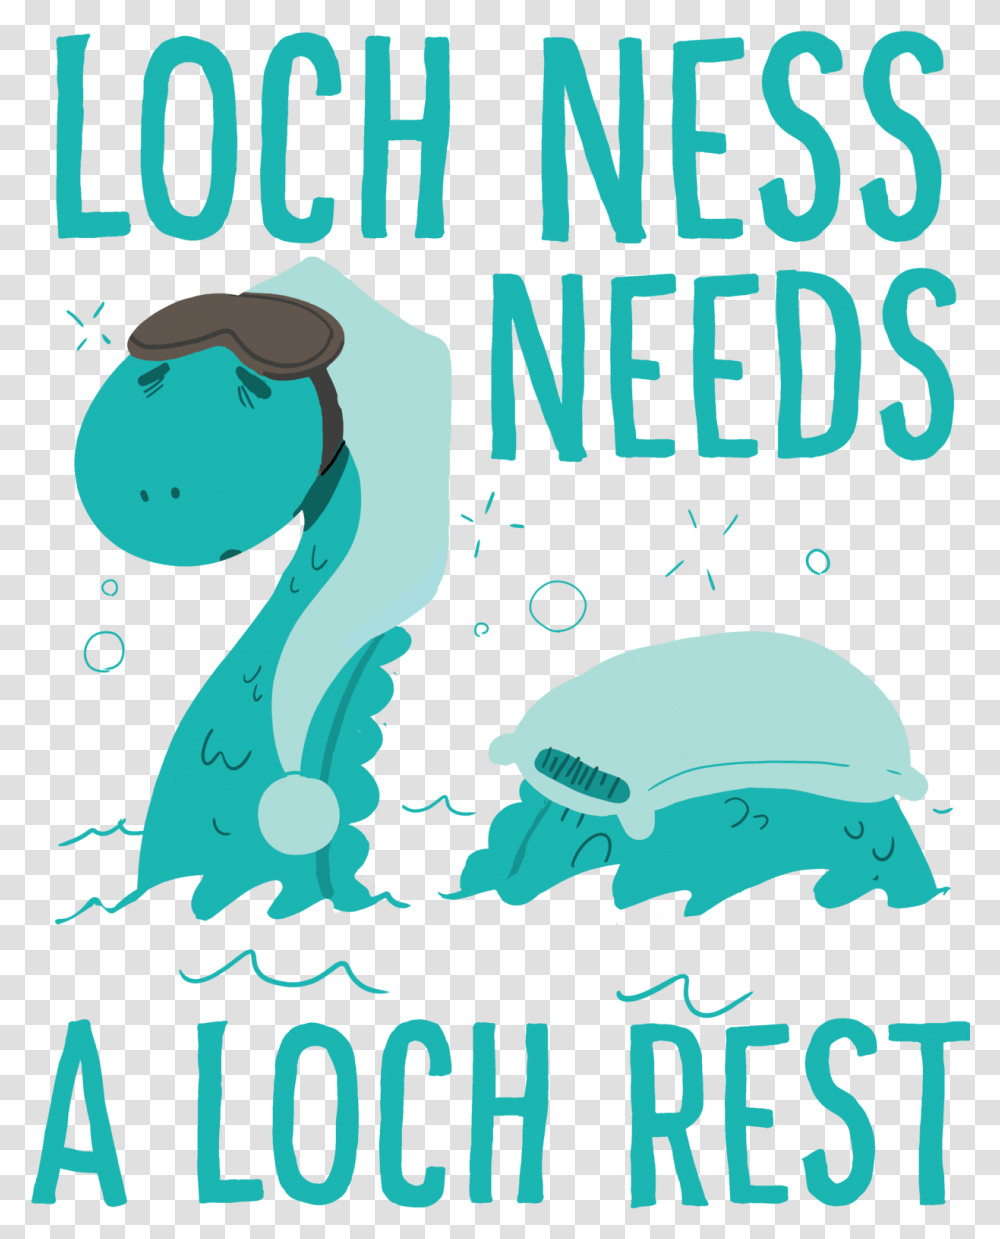 So Sleepy Nessie Needs A Restieavailable On Products, Poster, Advertisement, Flyer Transparent Png